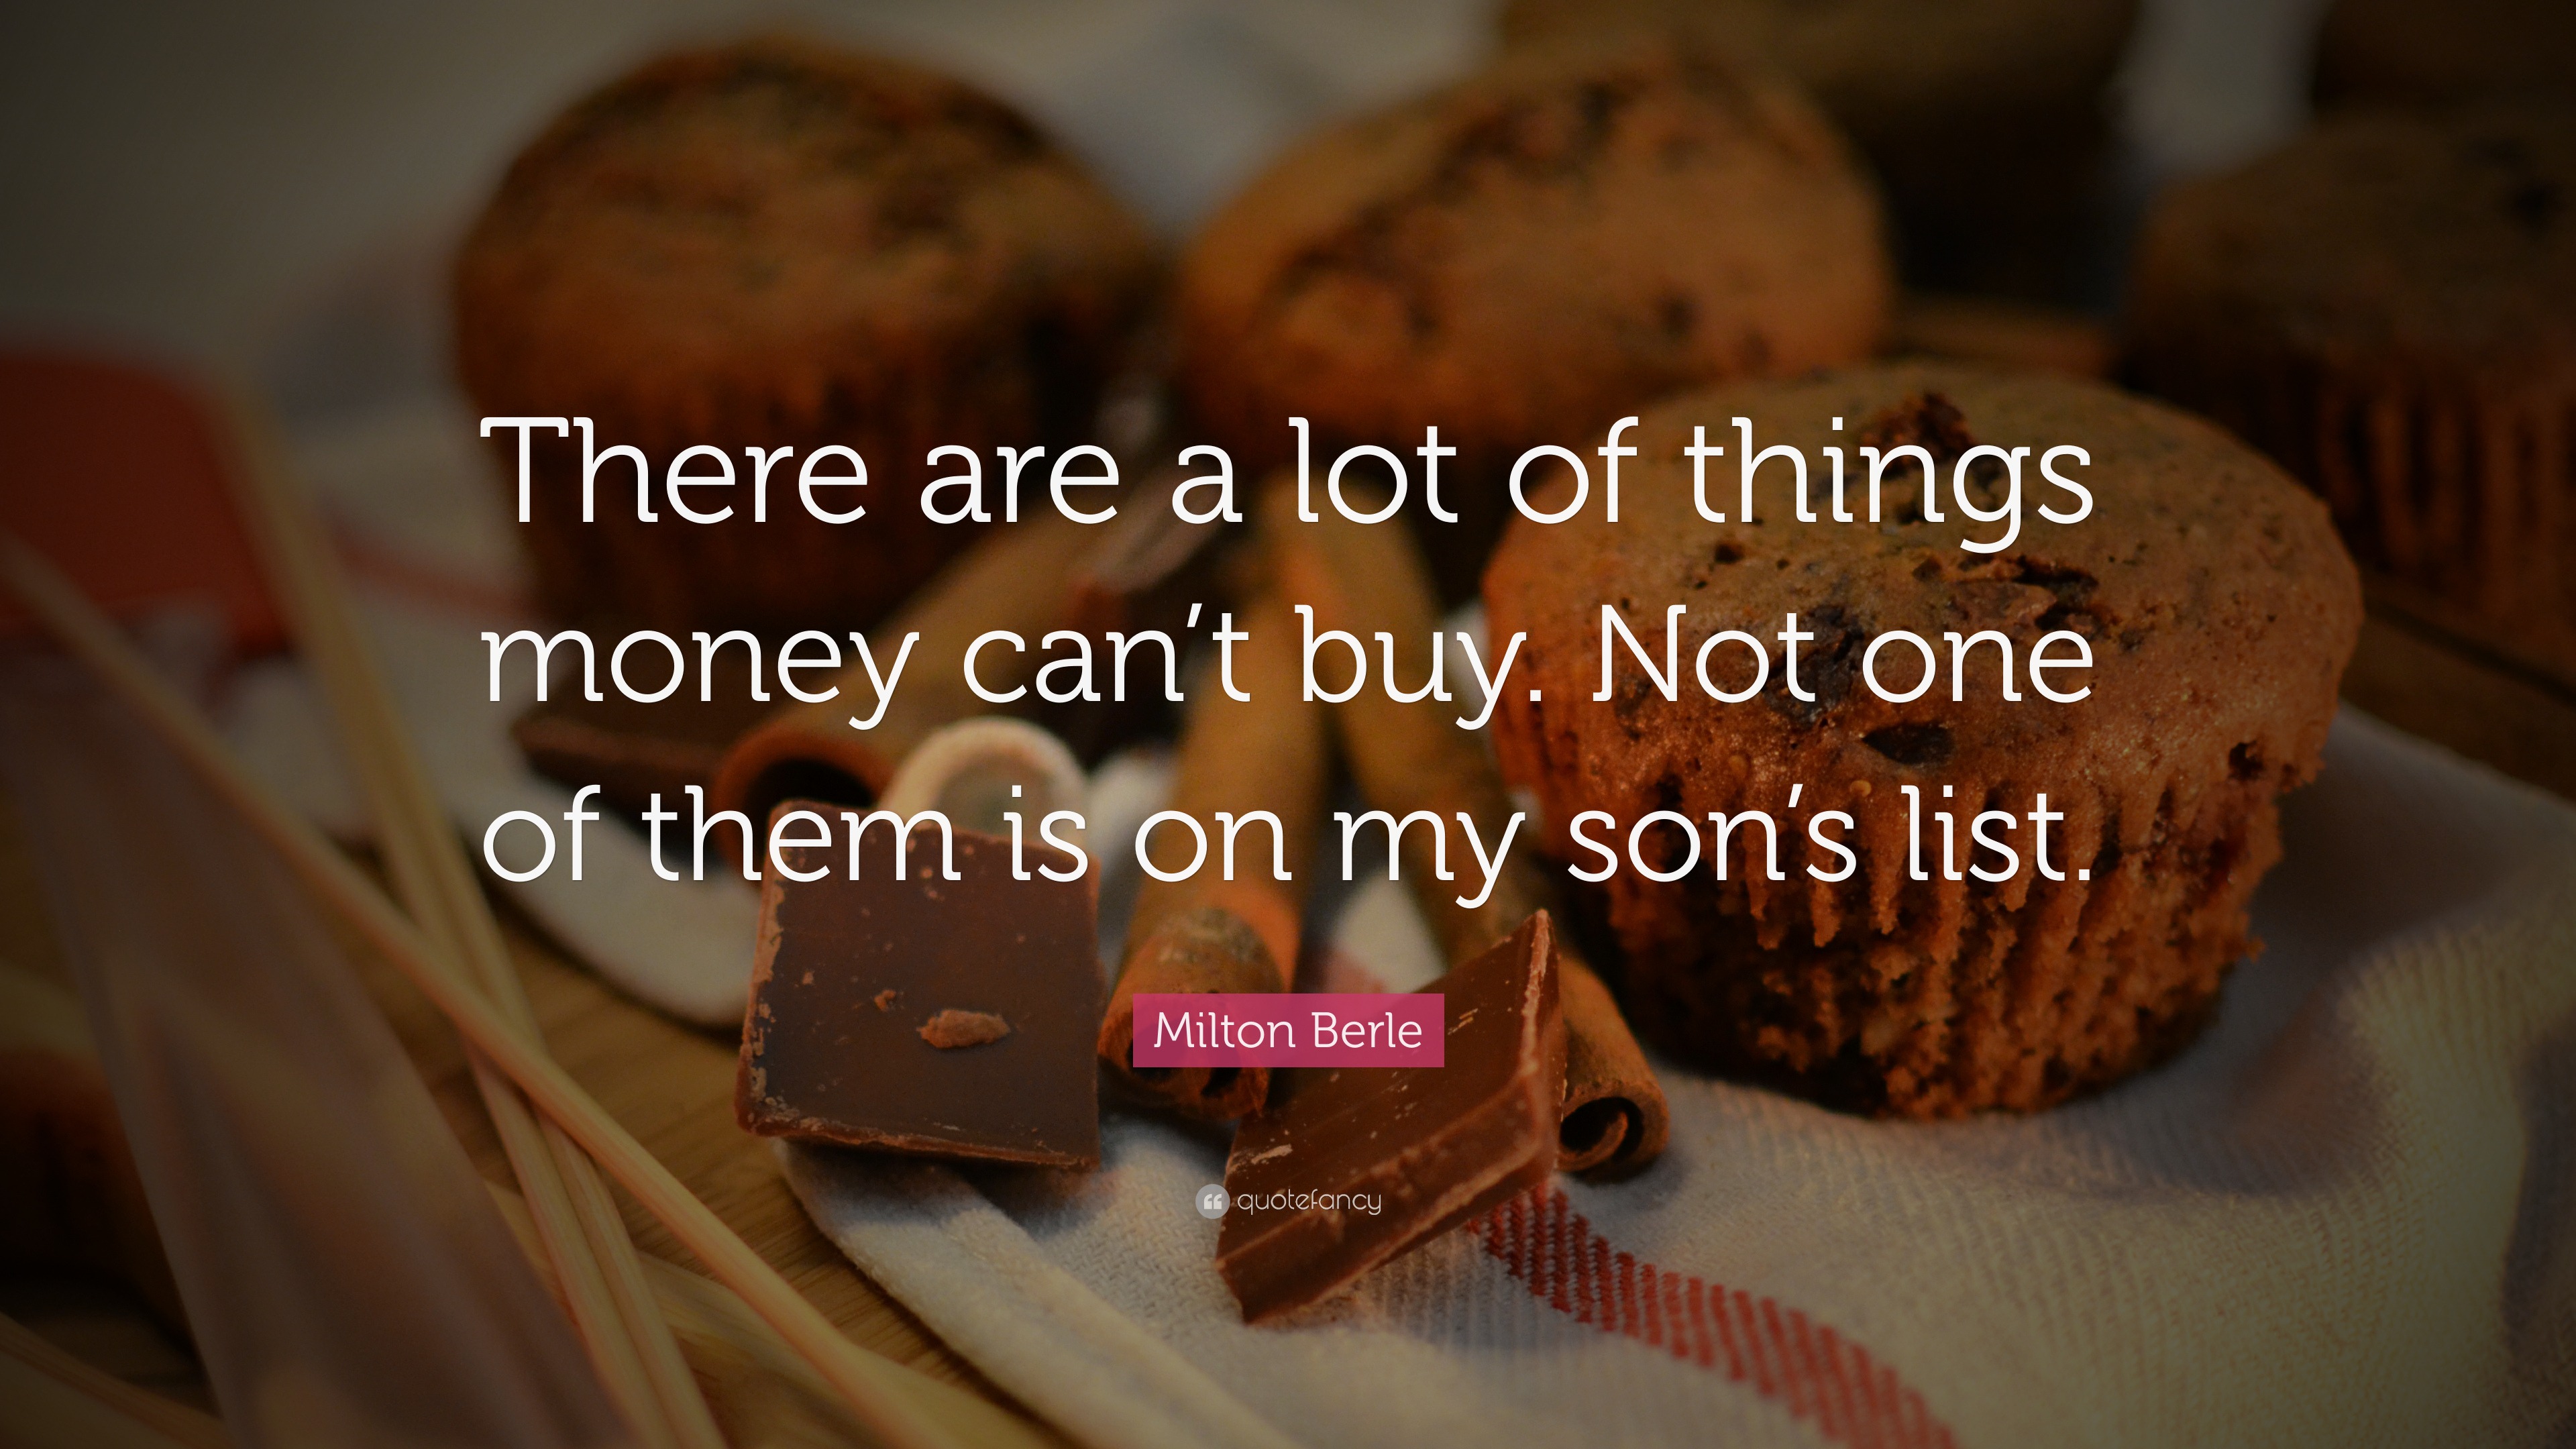 Milton Berle Quote: “There are a lot of things money can’t buy. Not one ...